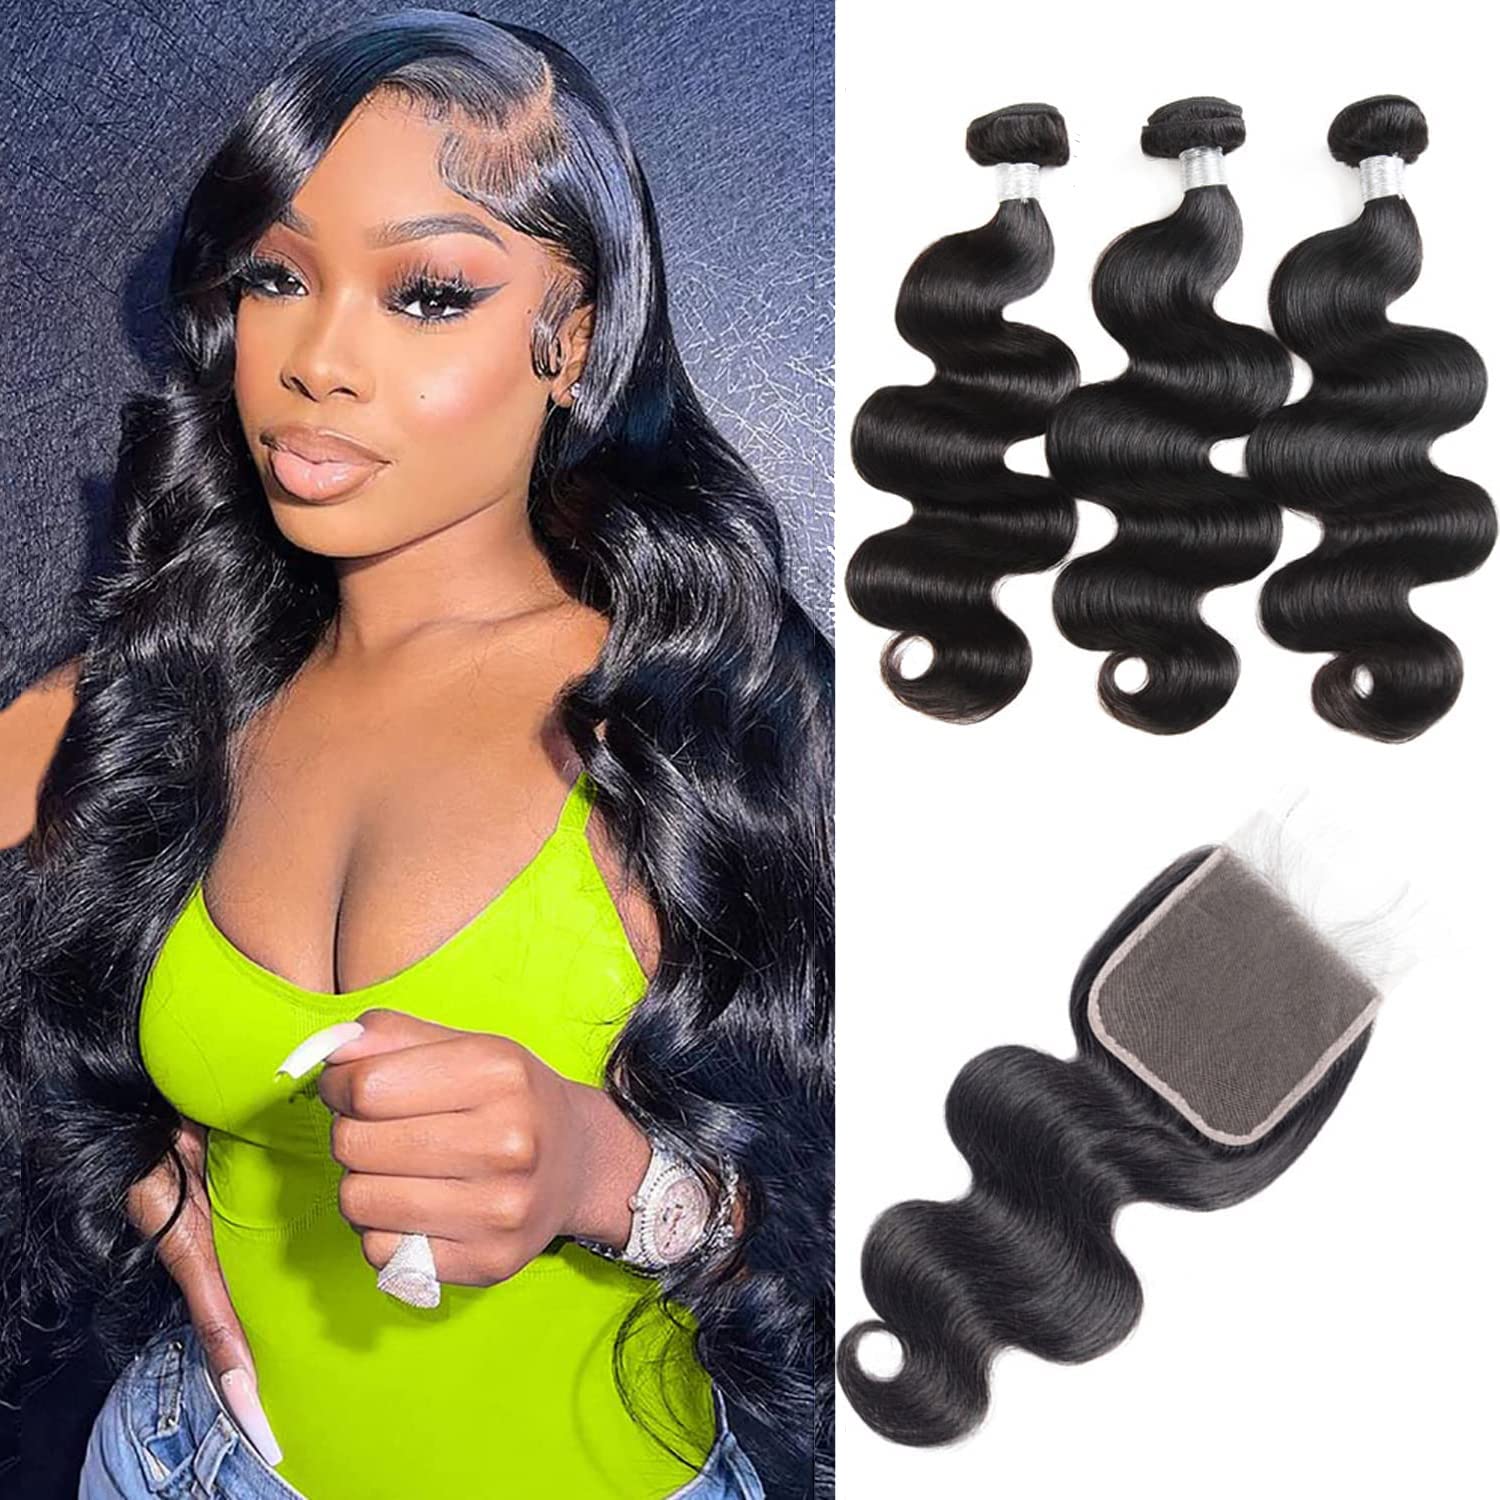 Lace Closure 5x5 With Straight Weave Hair Bundle Deals Virgin Hair